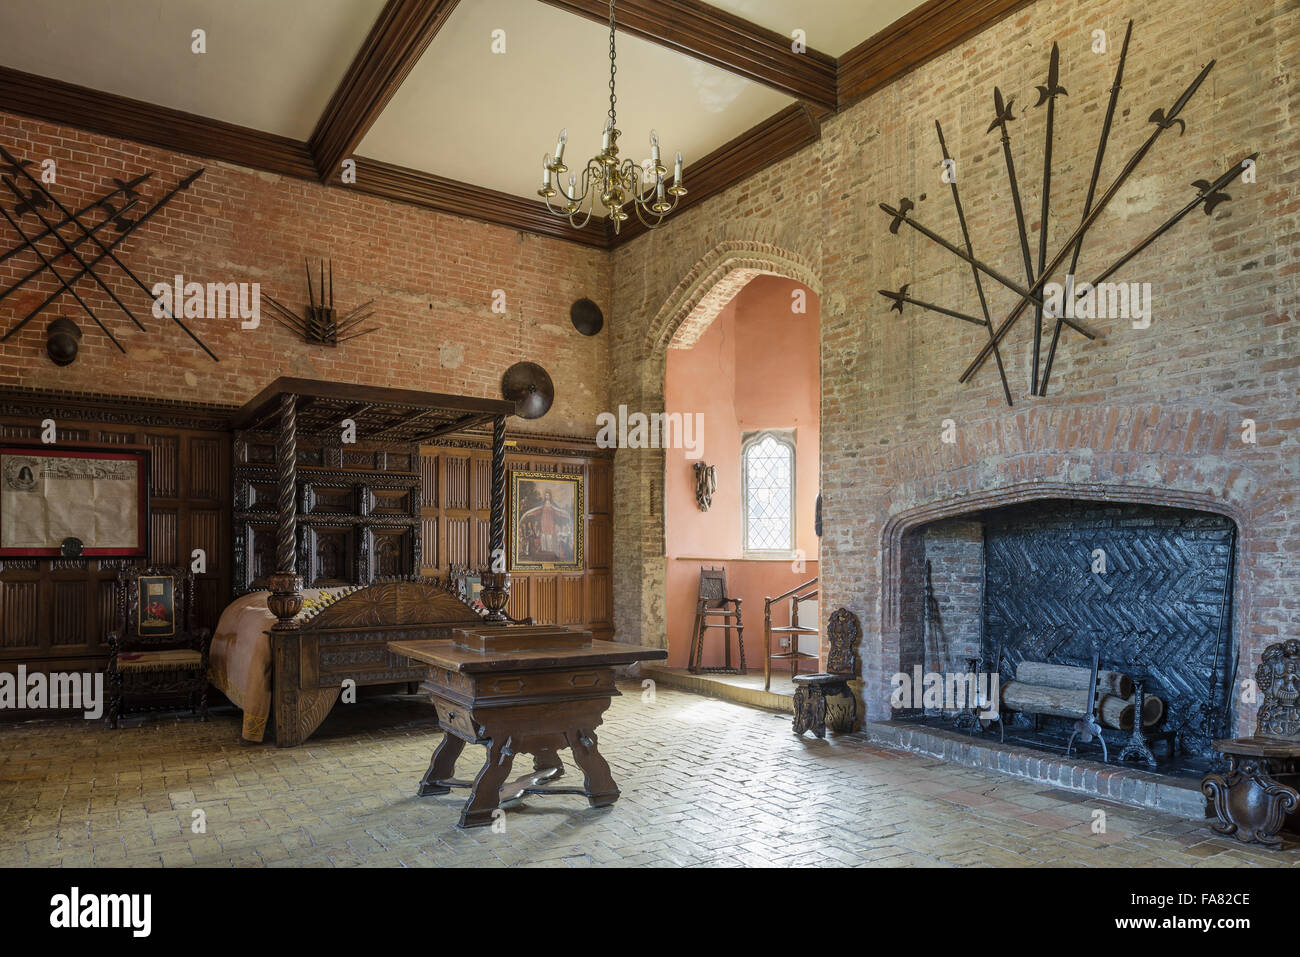 View of the King's Room, Oxburgh Hall, Norfolk. Henry VII occupied this room during his stay in 1487. Stock Photo